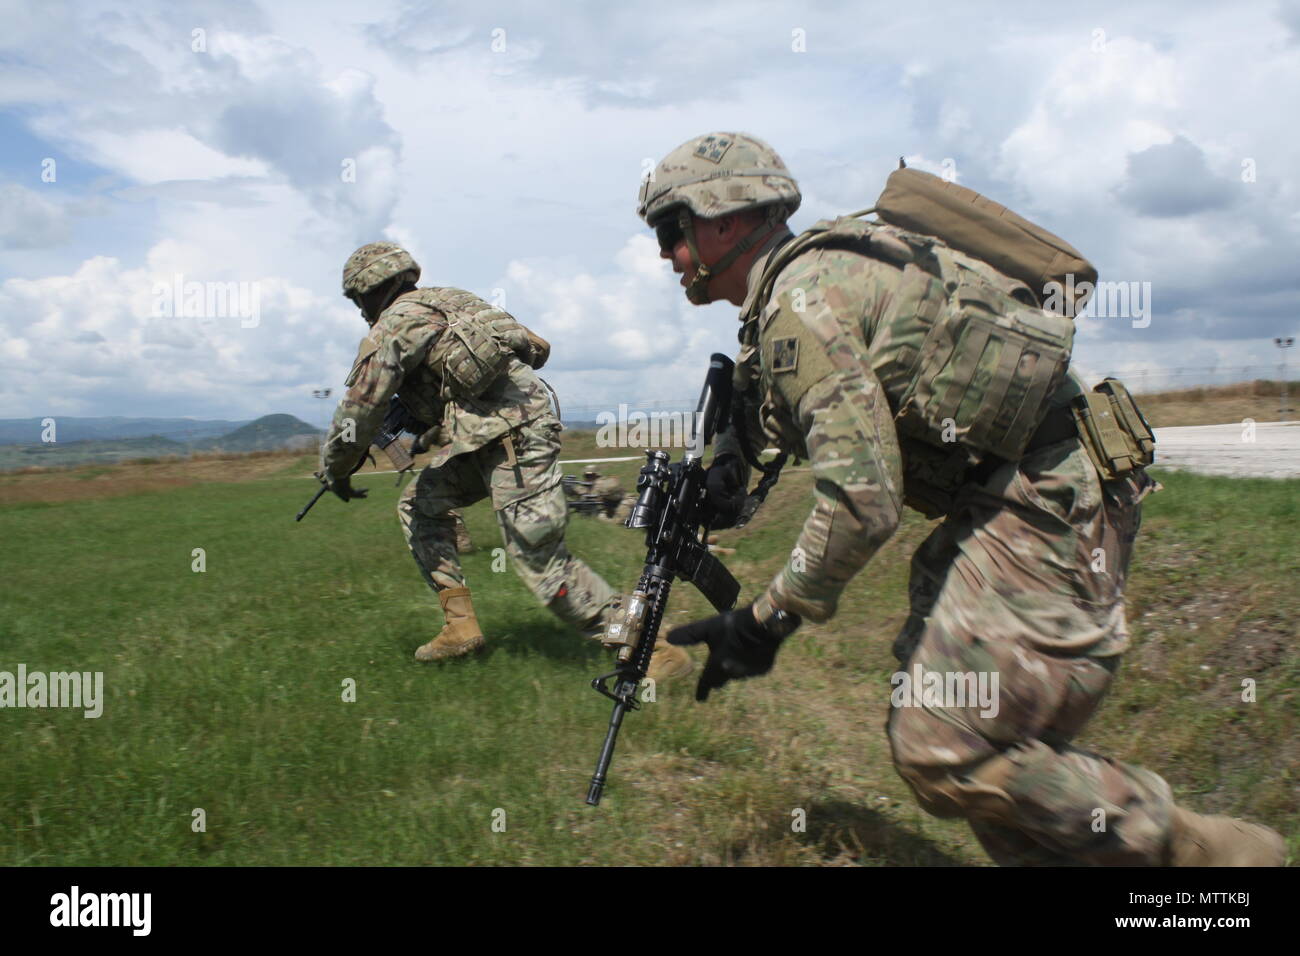 Soldiers bound forward toward the enemy during Advanced Rifle Marksmanship and Individual Movement Techniques training May 24 at Camp Marechal De Lattre De Tassigny, Kosovo. Stock Photo